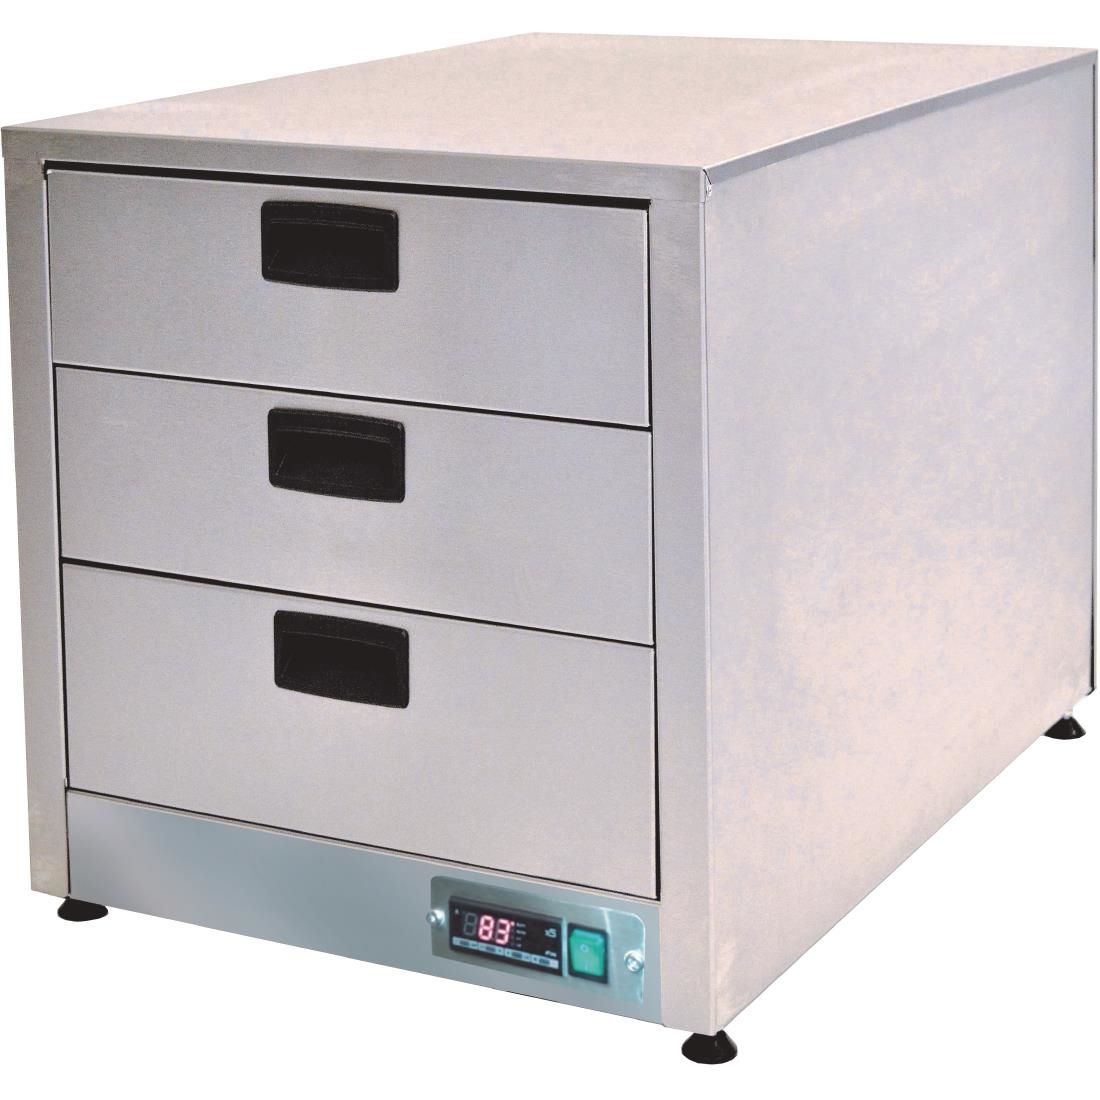 DR417 Moffat Warming Drawers GHD3 JD Catering Equipment Solutions Ltd